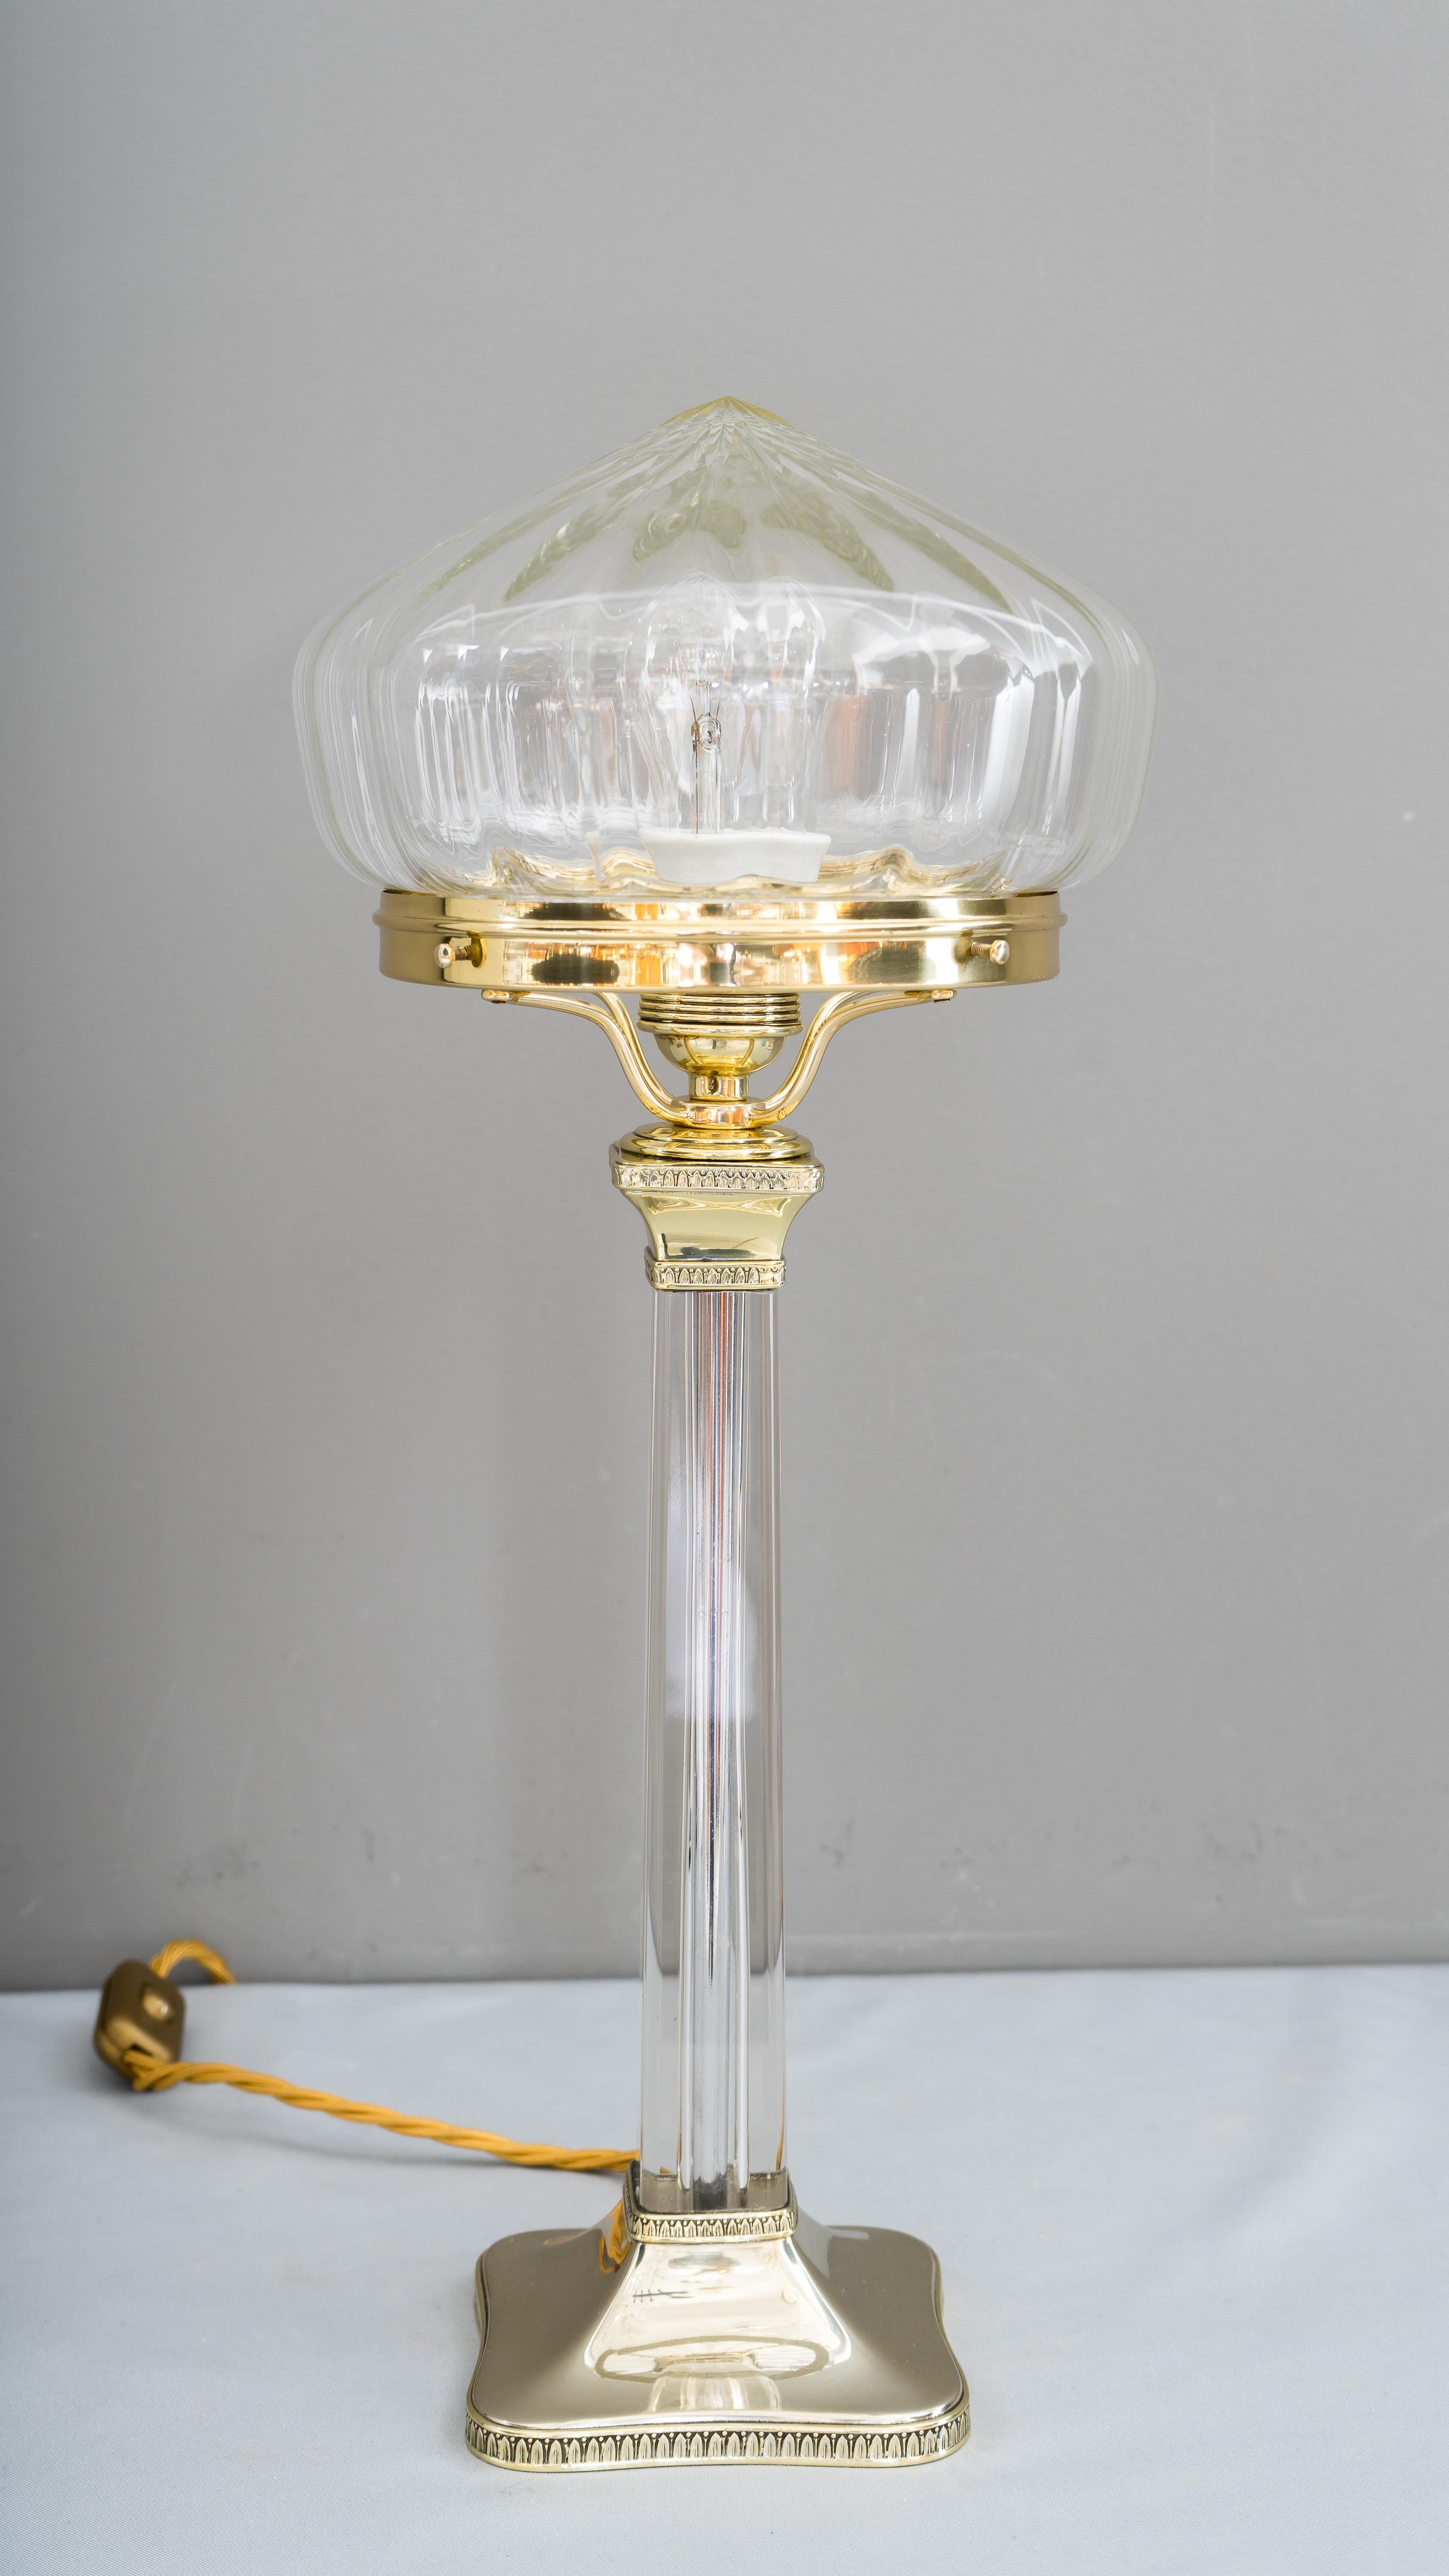 Art Deco table lamp, Vienna, circa 1920s
Brass, glass and alpaca
Polished and stove enameled.